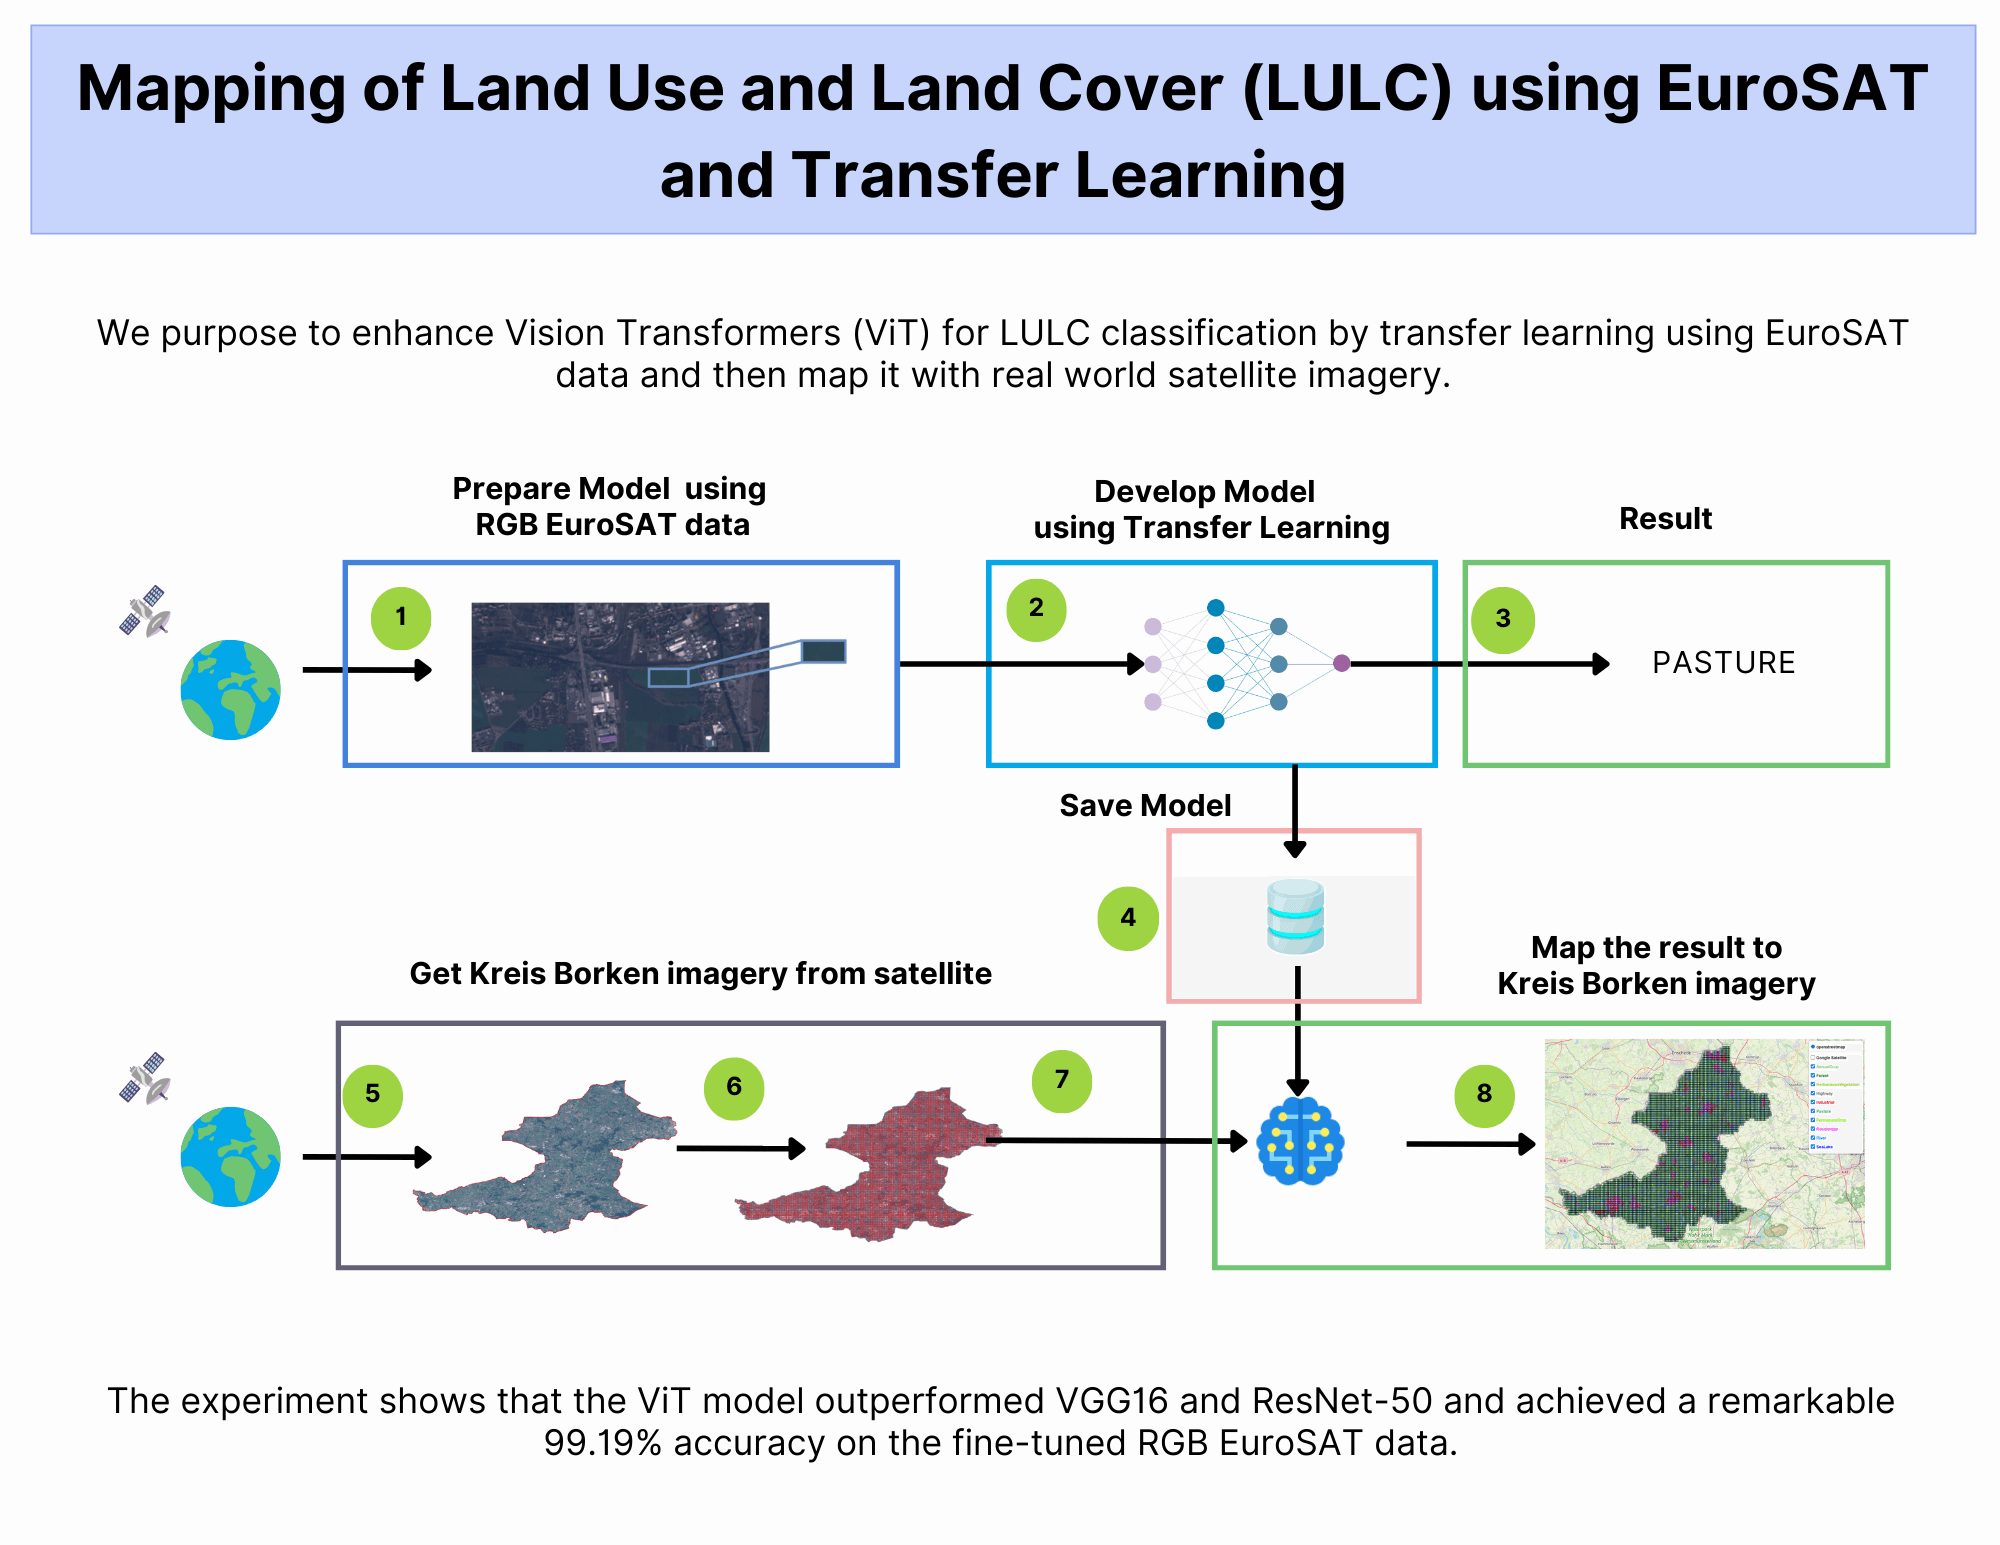 Mapping of Land Use and Land Cover (LULC) Using EuroSAT and Transfer Learning